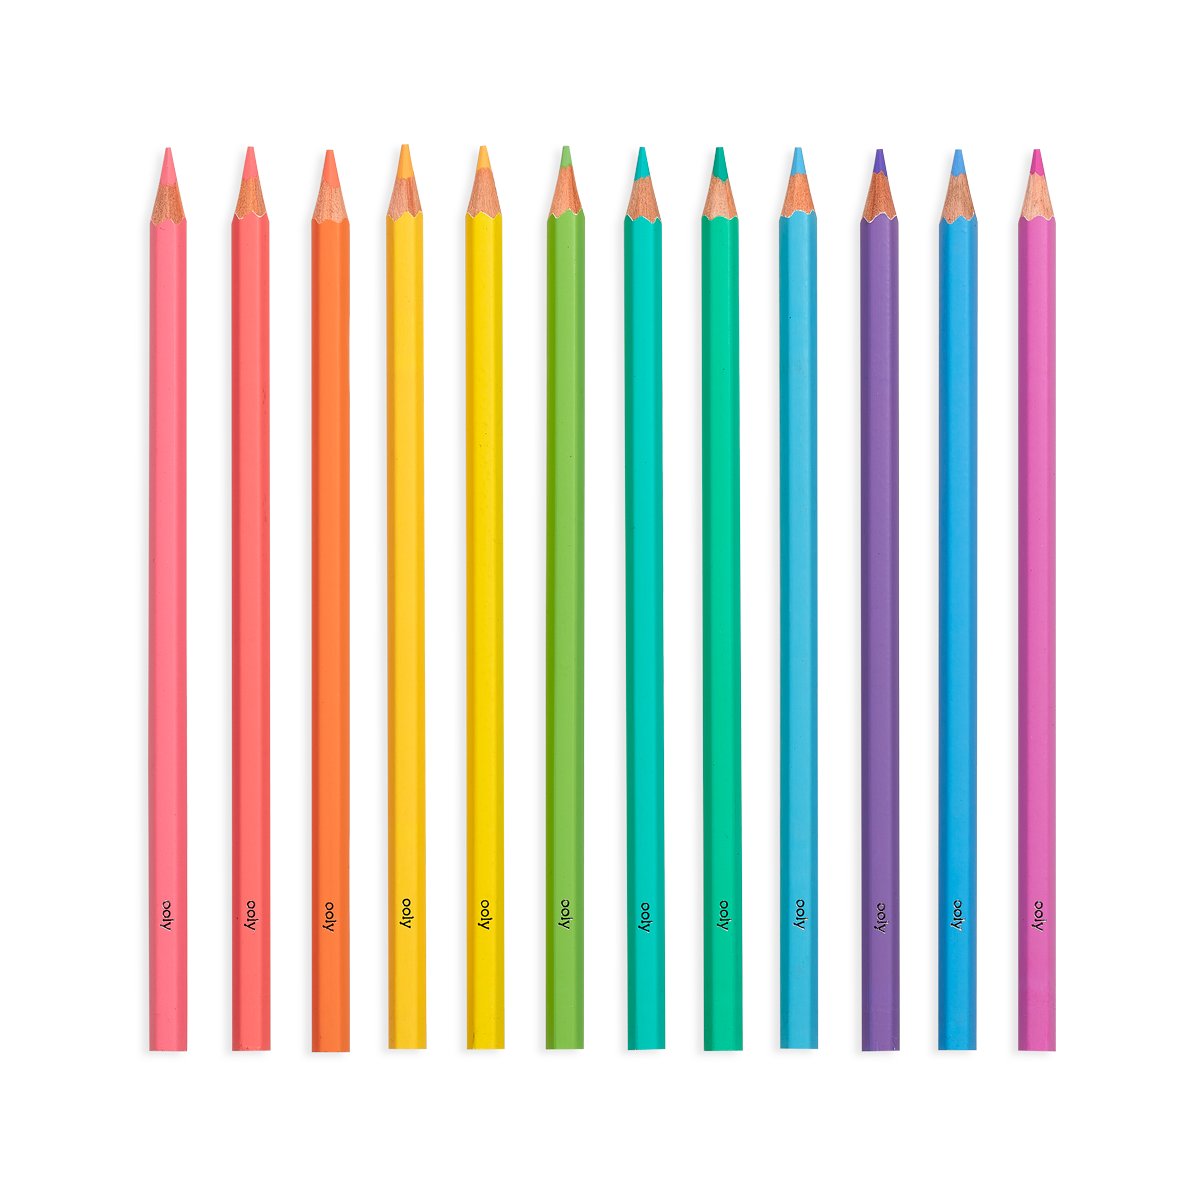 Ooly Draw 'n' Doodle Mini Colored Pencils + Sharpener - Navy